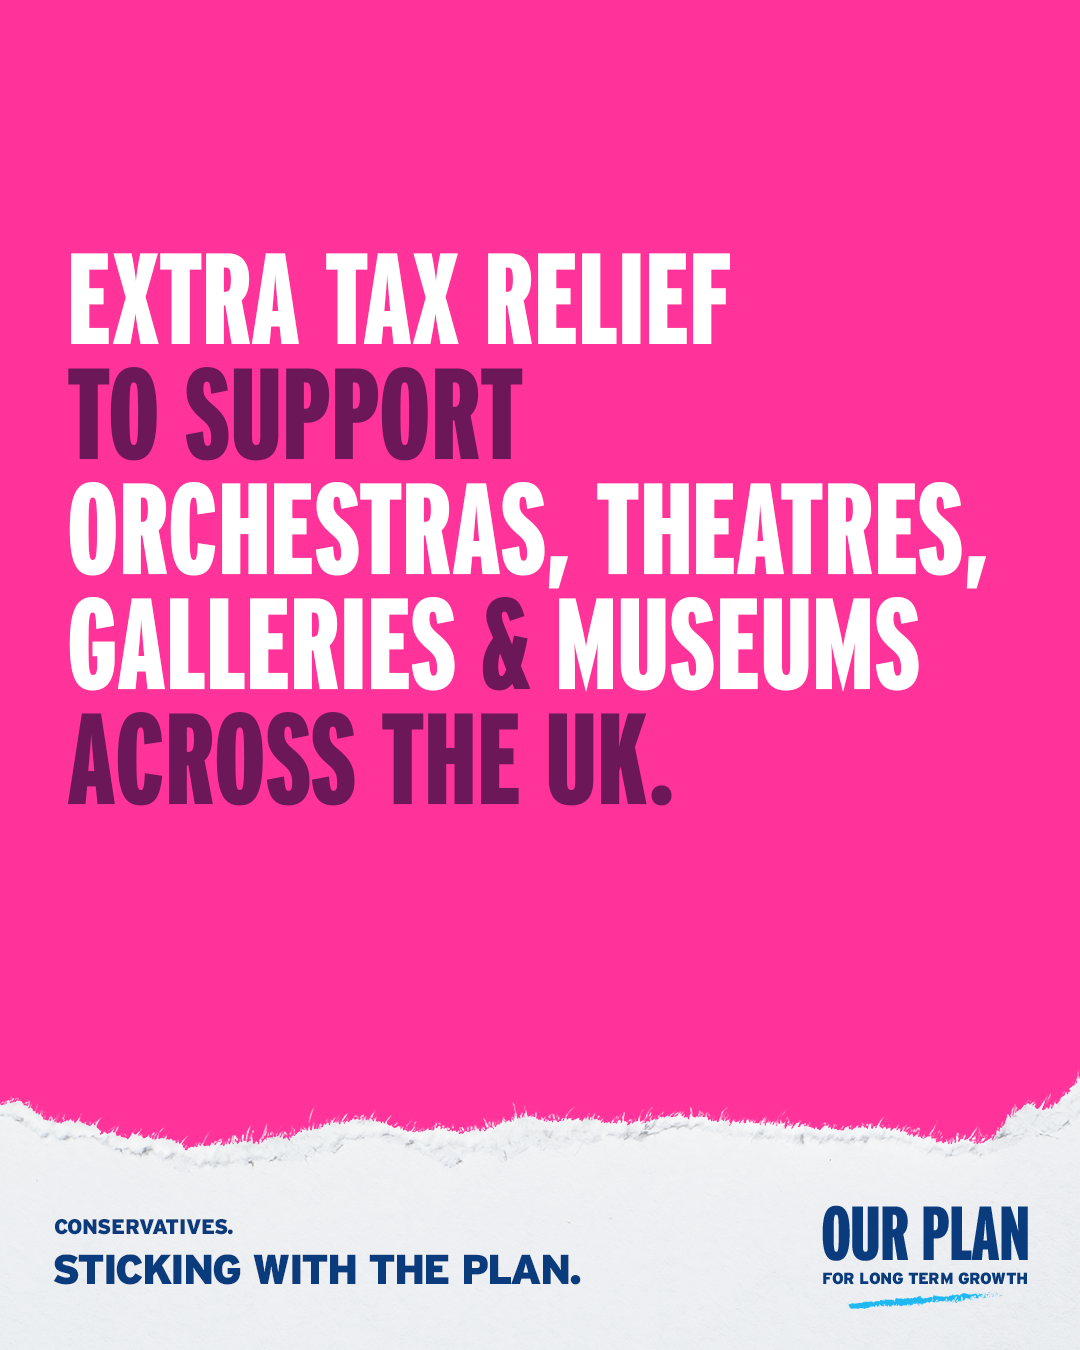 We're also giving extra tax relief for cultural organisations across the UK